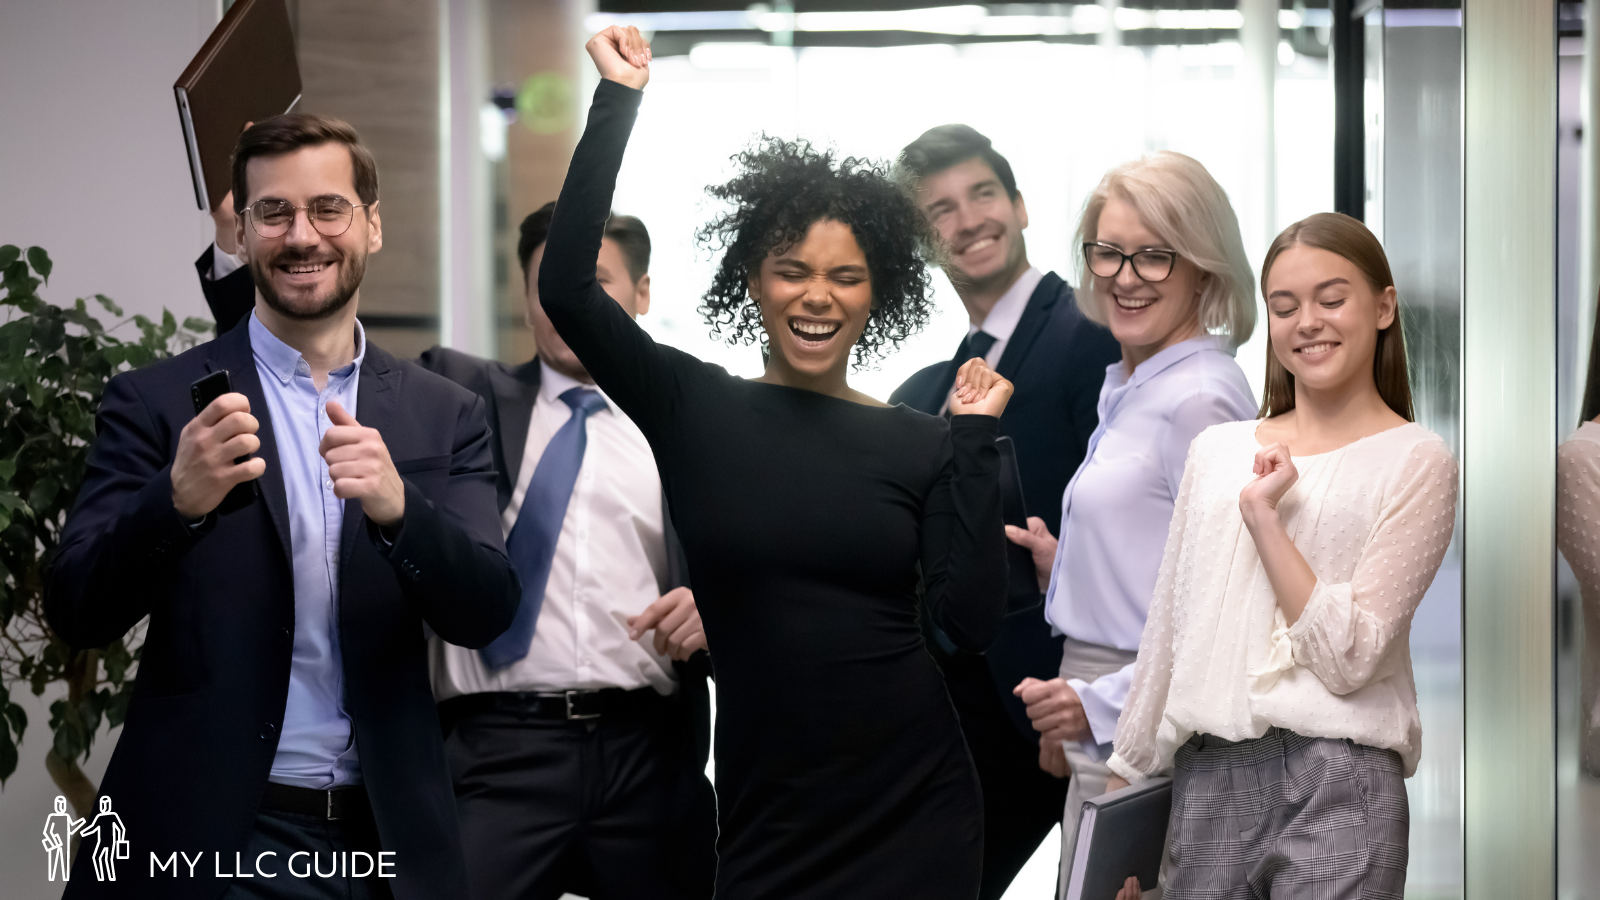 business people cheering in an office hallway